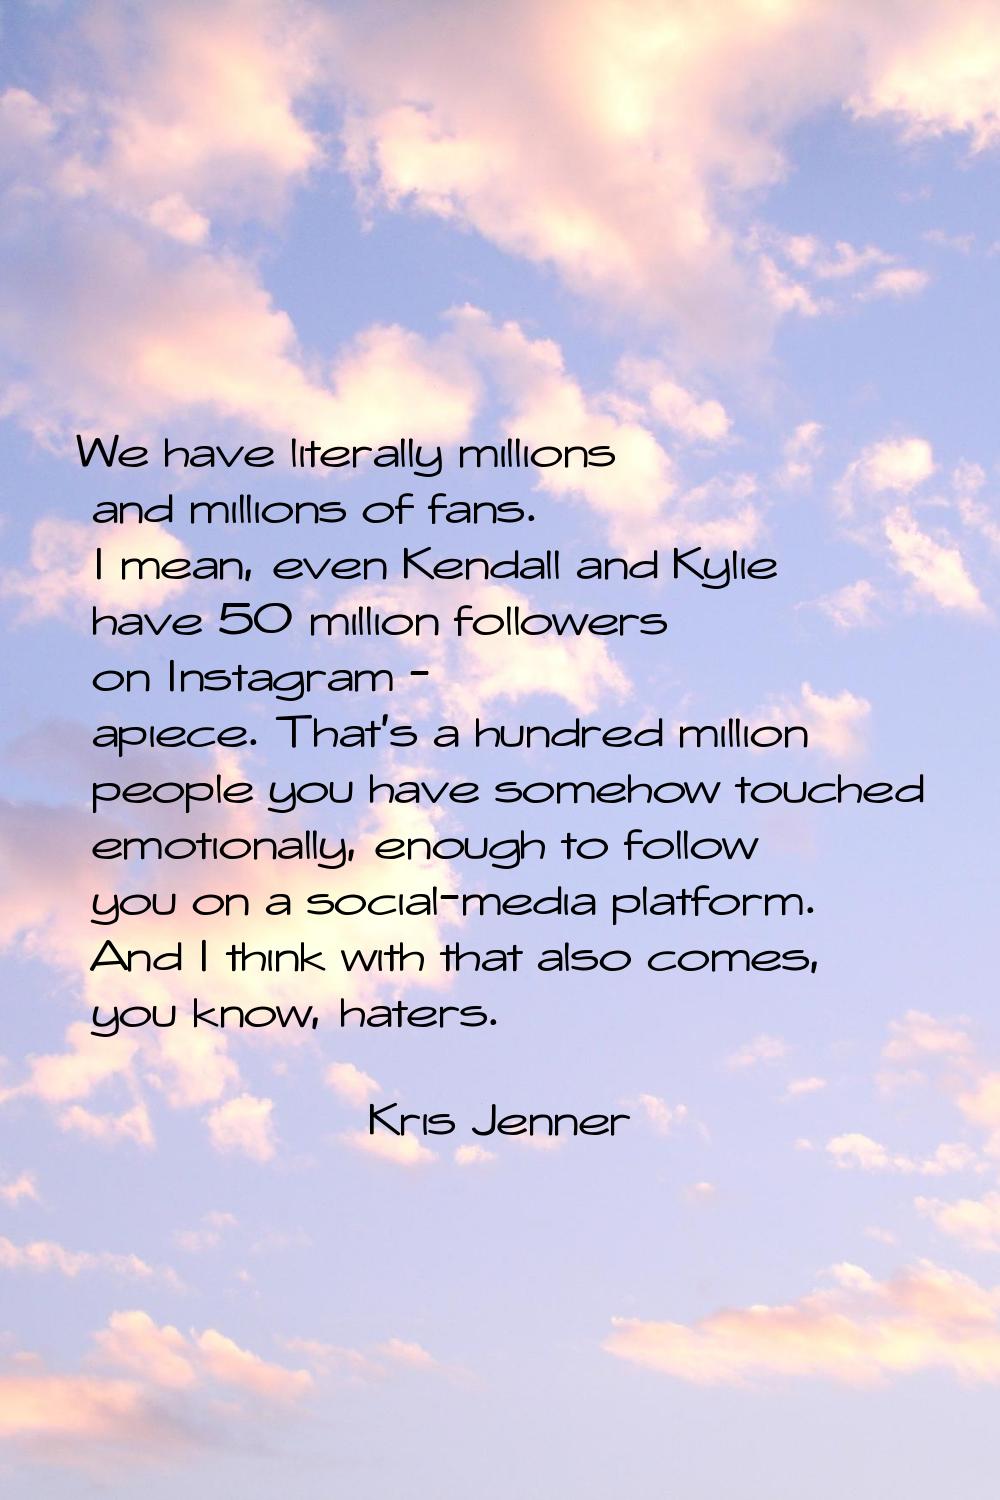 We have literally millions and millions of fans. I mean, even Kendall and Kylie have 50 million fol